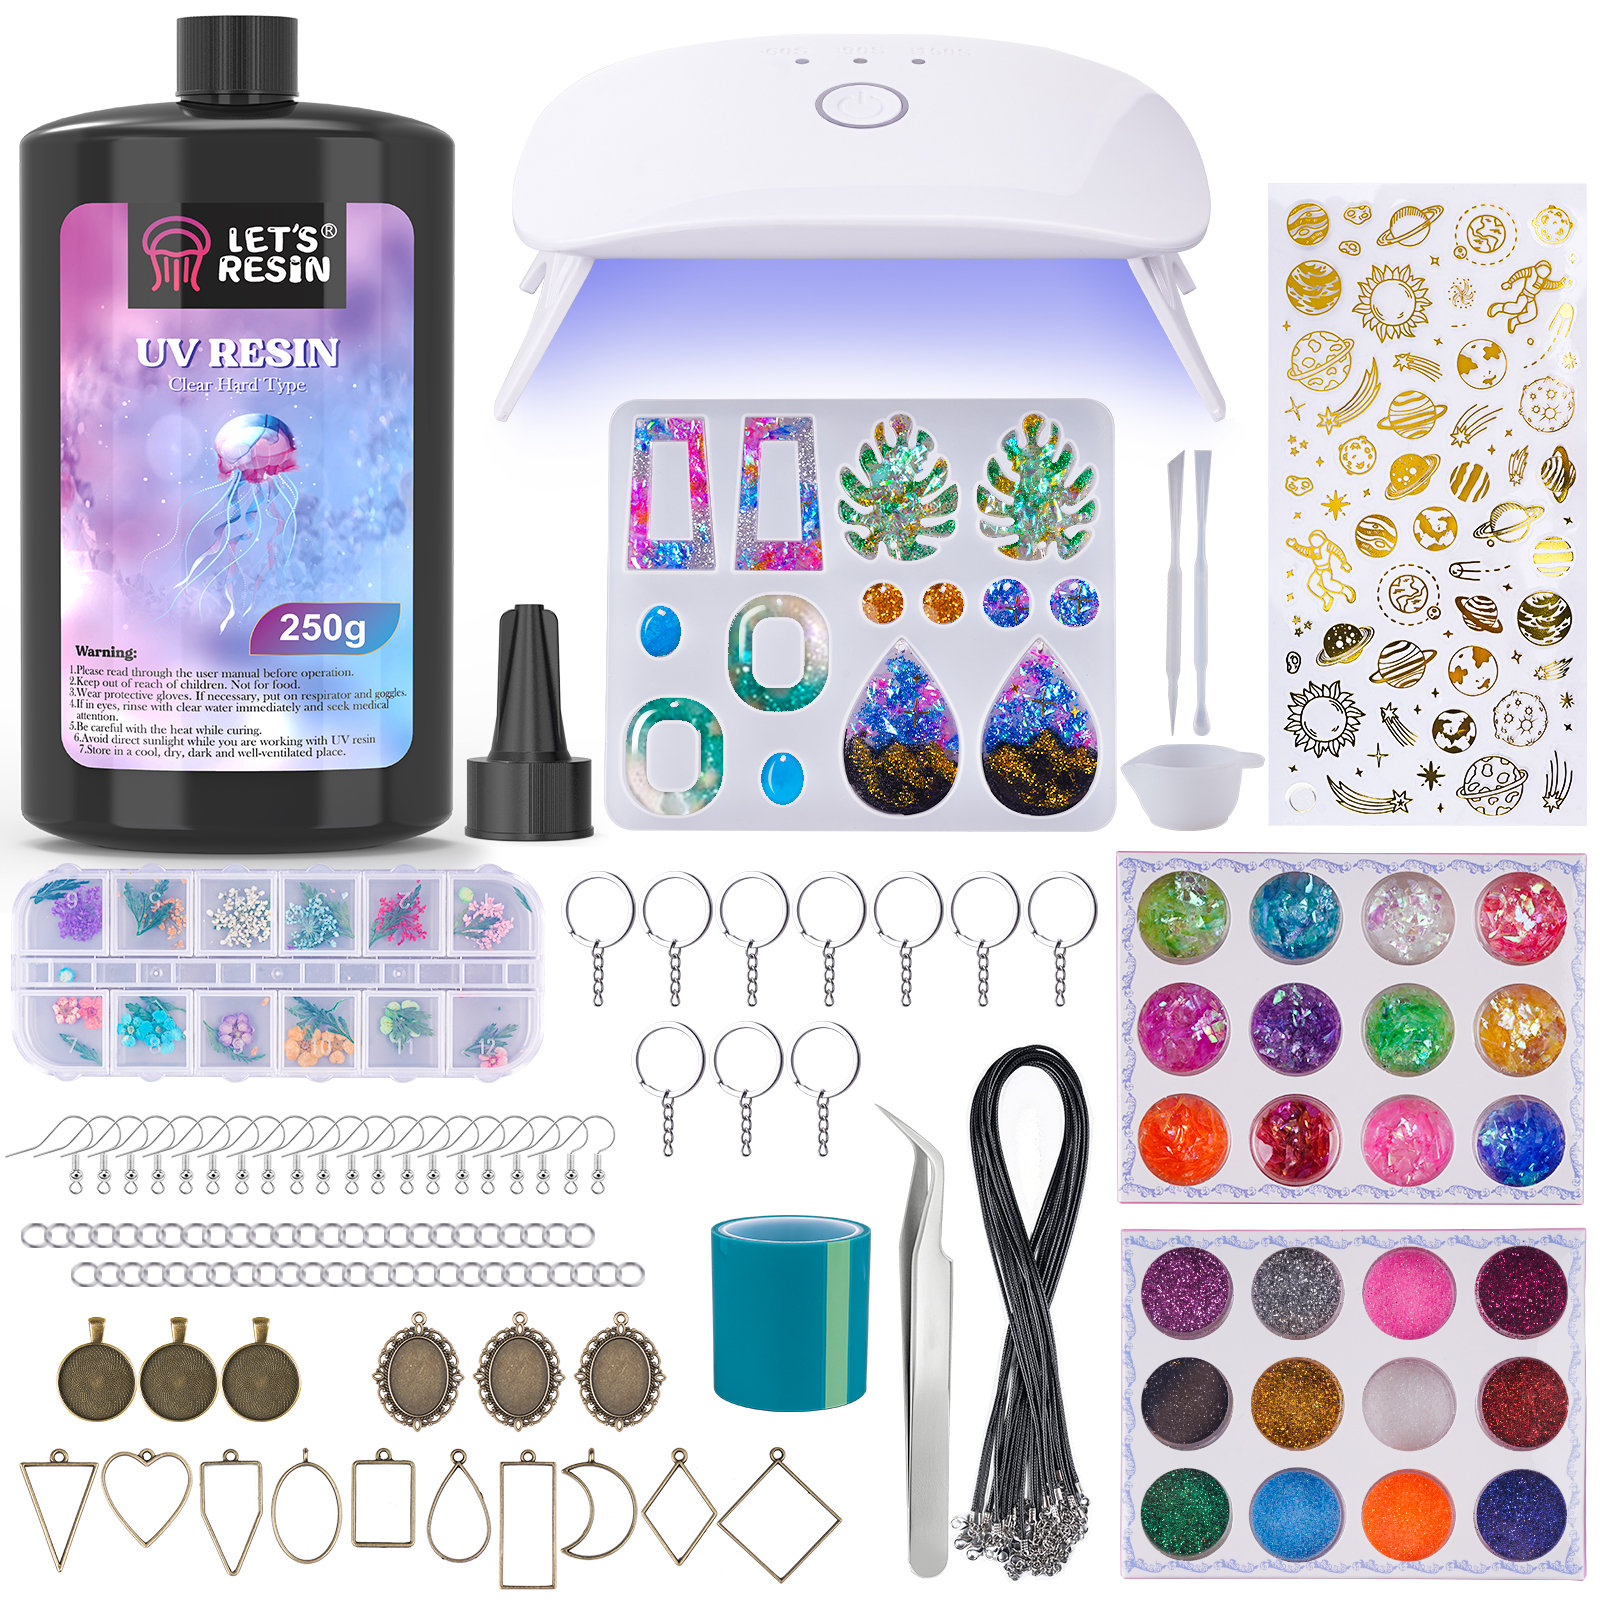  LET'S RESIN Epoxy Resin Starter Kit for Beginners, 44OZ Resin  Art Kit for Craft,Fast Cure Resin for Coating,Jewelry,Tumbler,Paintings,  Crystal Clear Casting Resin with Cups, Pigment Powder : Arts, Crafts &  Sewing